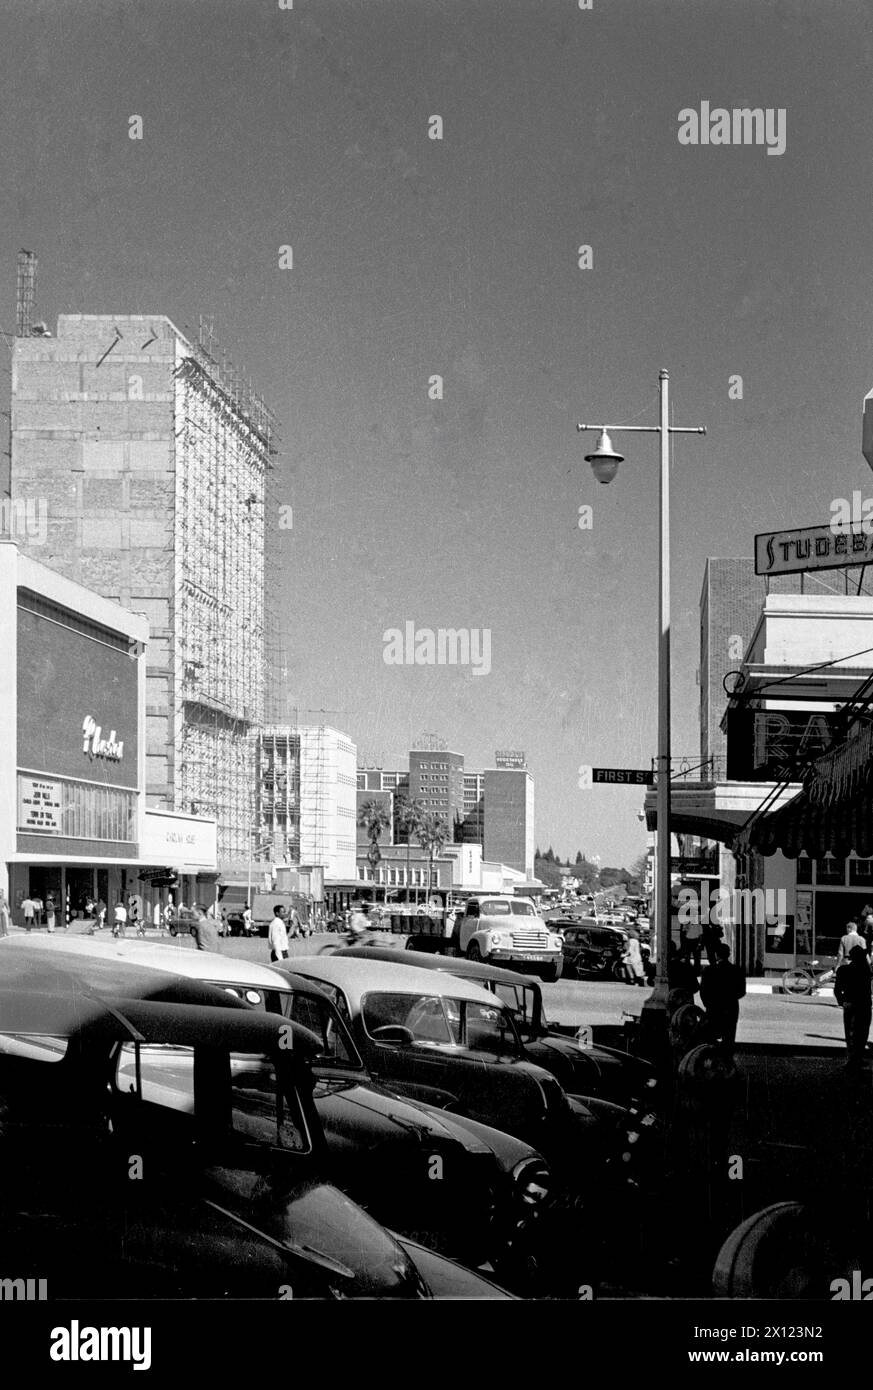 Main Street or High Street in City Centre or Town Centre of Salisbury Rhodesia now Harare Zimbabwe. Street Scene includes (to far left) the Rhodes Cinema. Vintage or Historic  Monochrome or Black and White Image c1960 Stock Photo